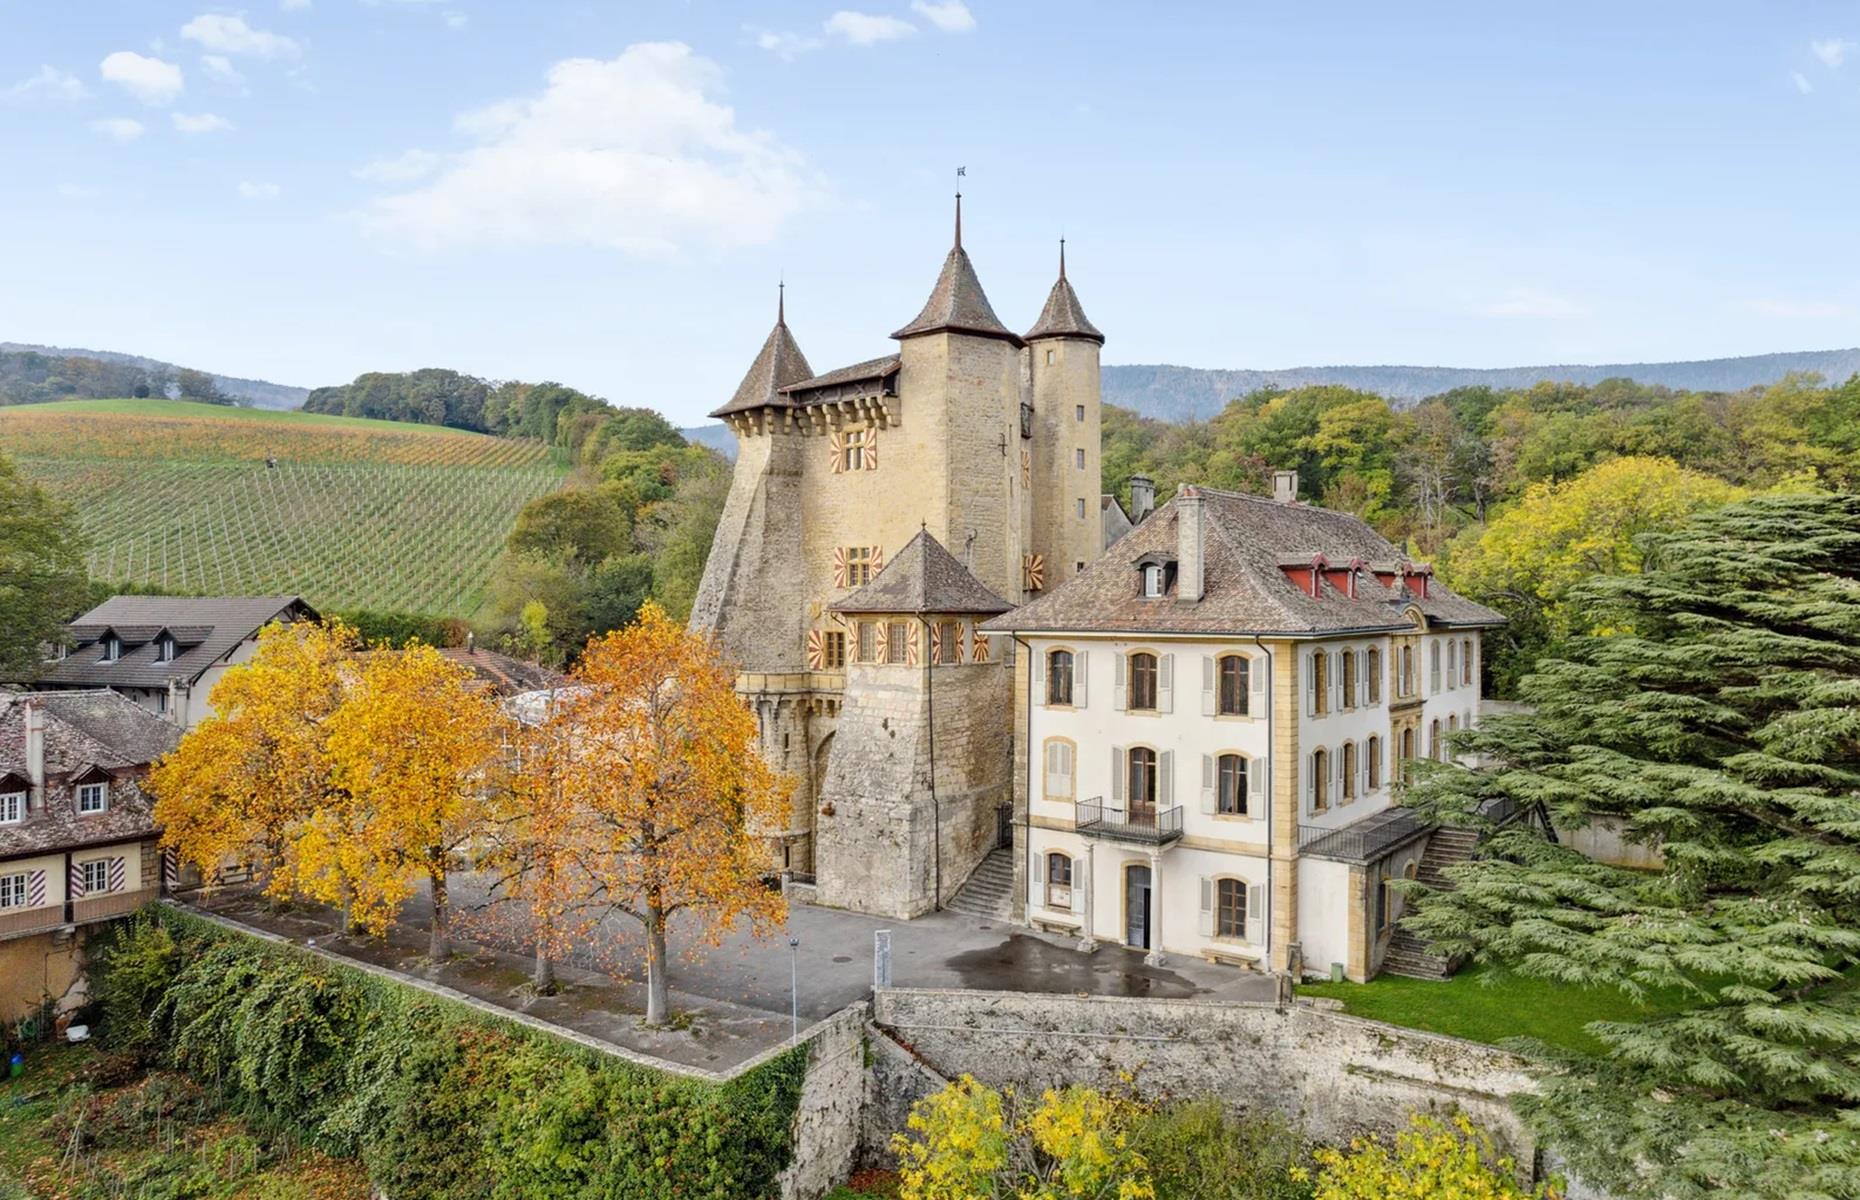 <p>Château de Vaumarcus is undoubtedly one of the finest relics from the Middle Ages in Switzerland. Positioned on a rocky hilltop, it offers unrivalled panoramic view of Lake Neuchâtel below.</p>  <p>The castle is enclosed by more than seven acres of land and boasts a sprawling, 17,577-square-foot interior. Let's explore...</p>